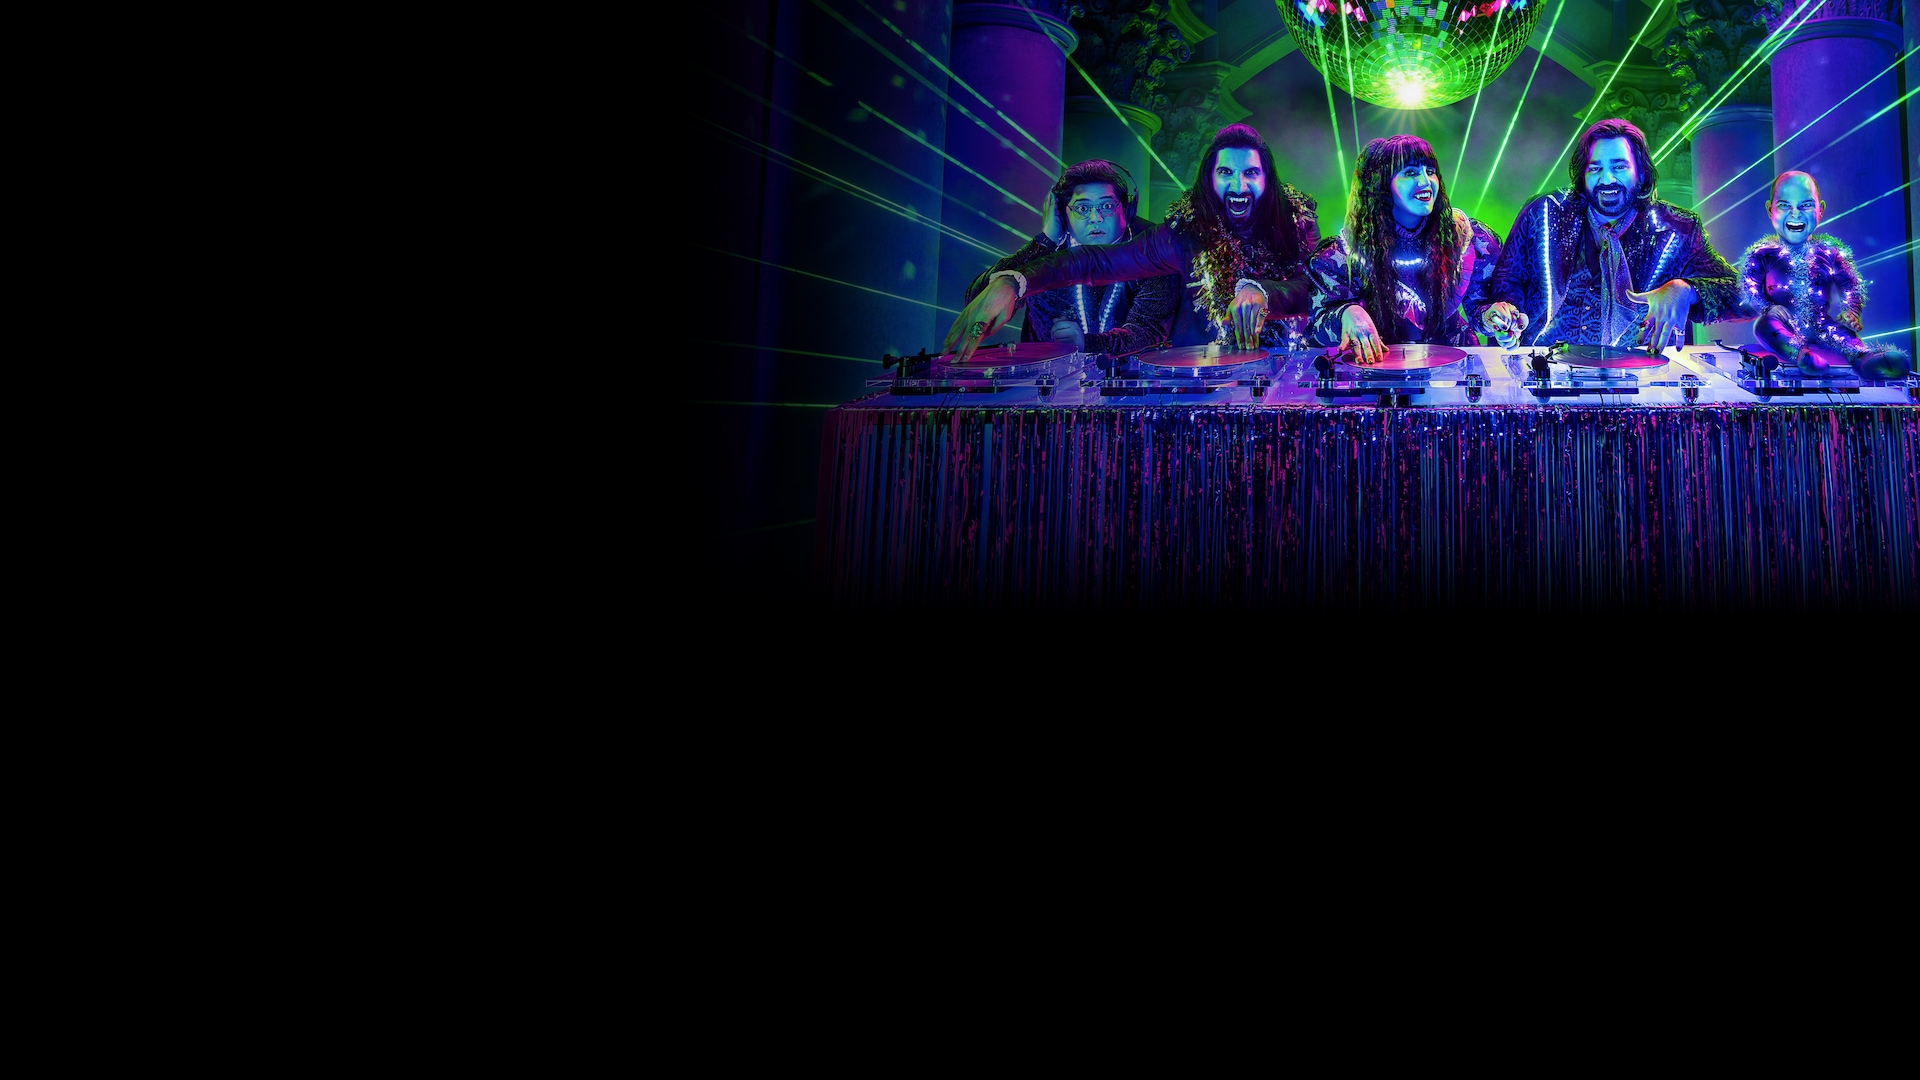 What We Do in the Shadows cast djing on a turn table with green lasers in purple effect